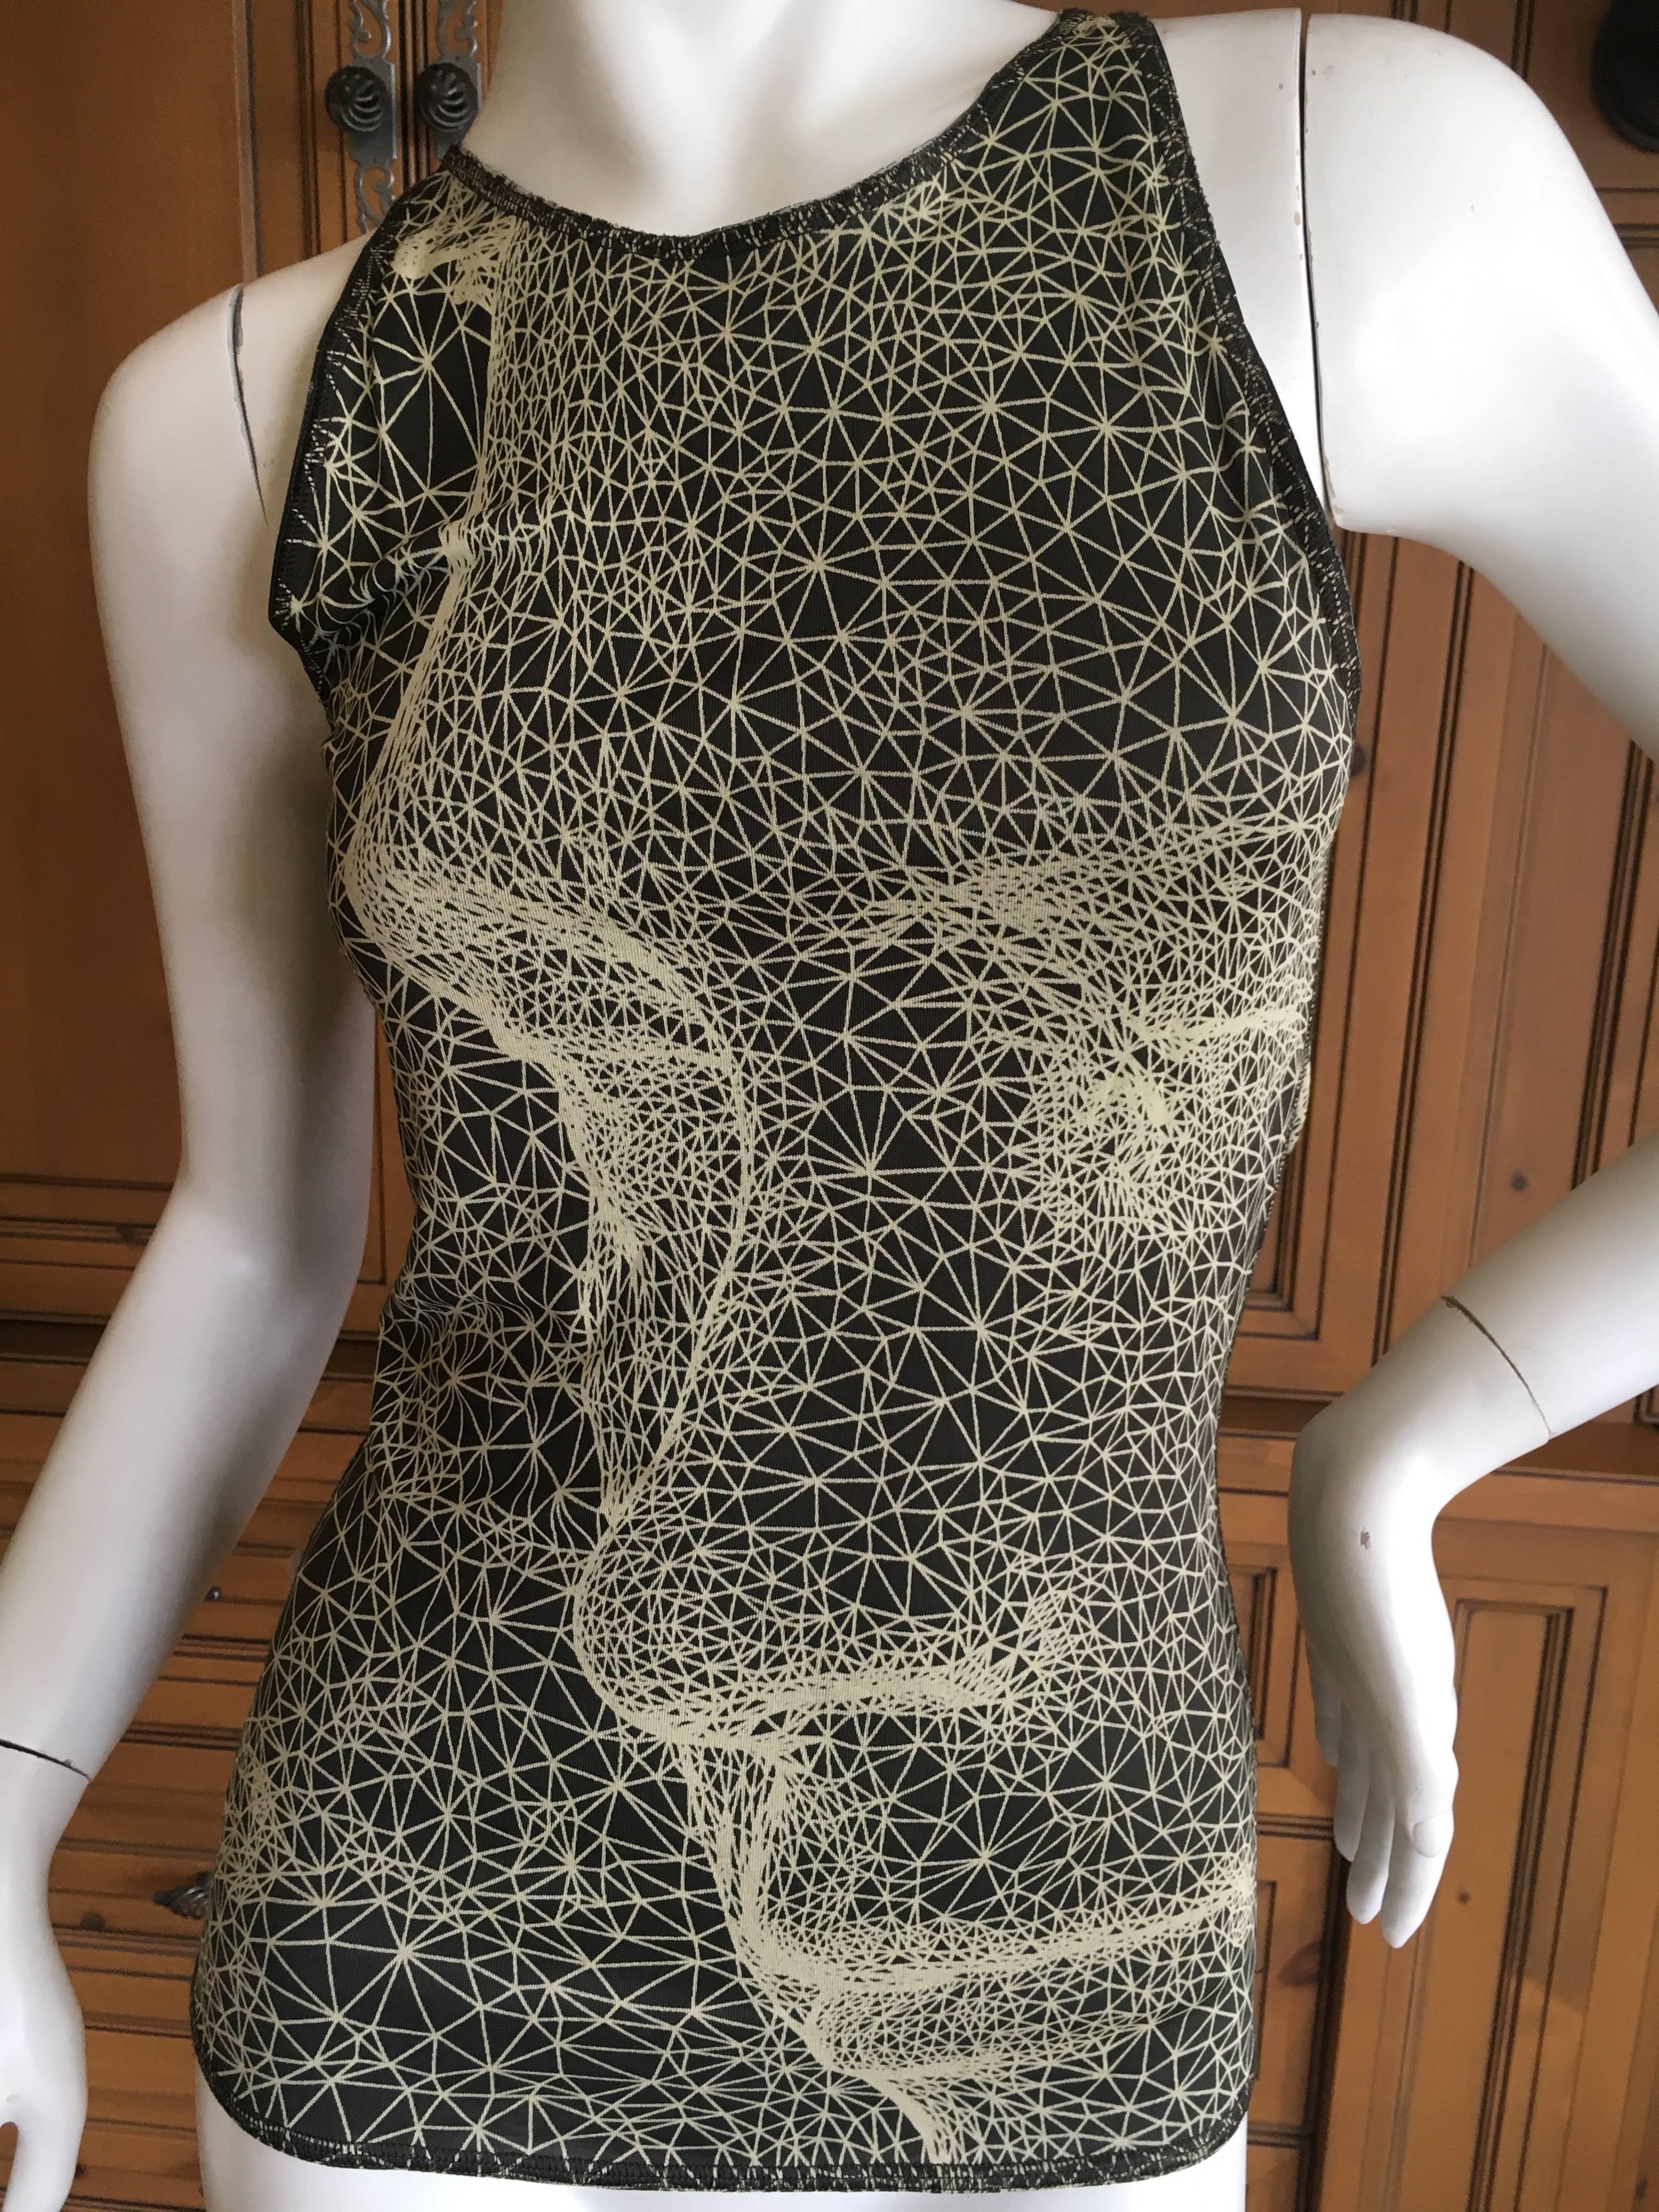 Jean Paul Gaultier Femme Face Print Tank Top In Excellent Condition For Sale In Cloverdale, CA